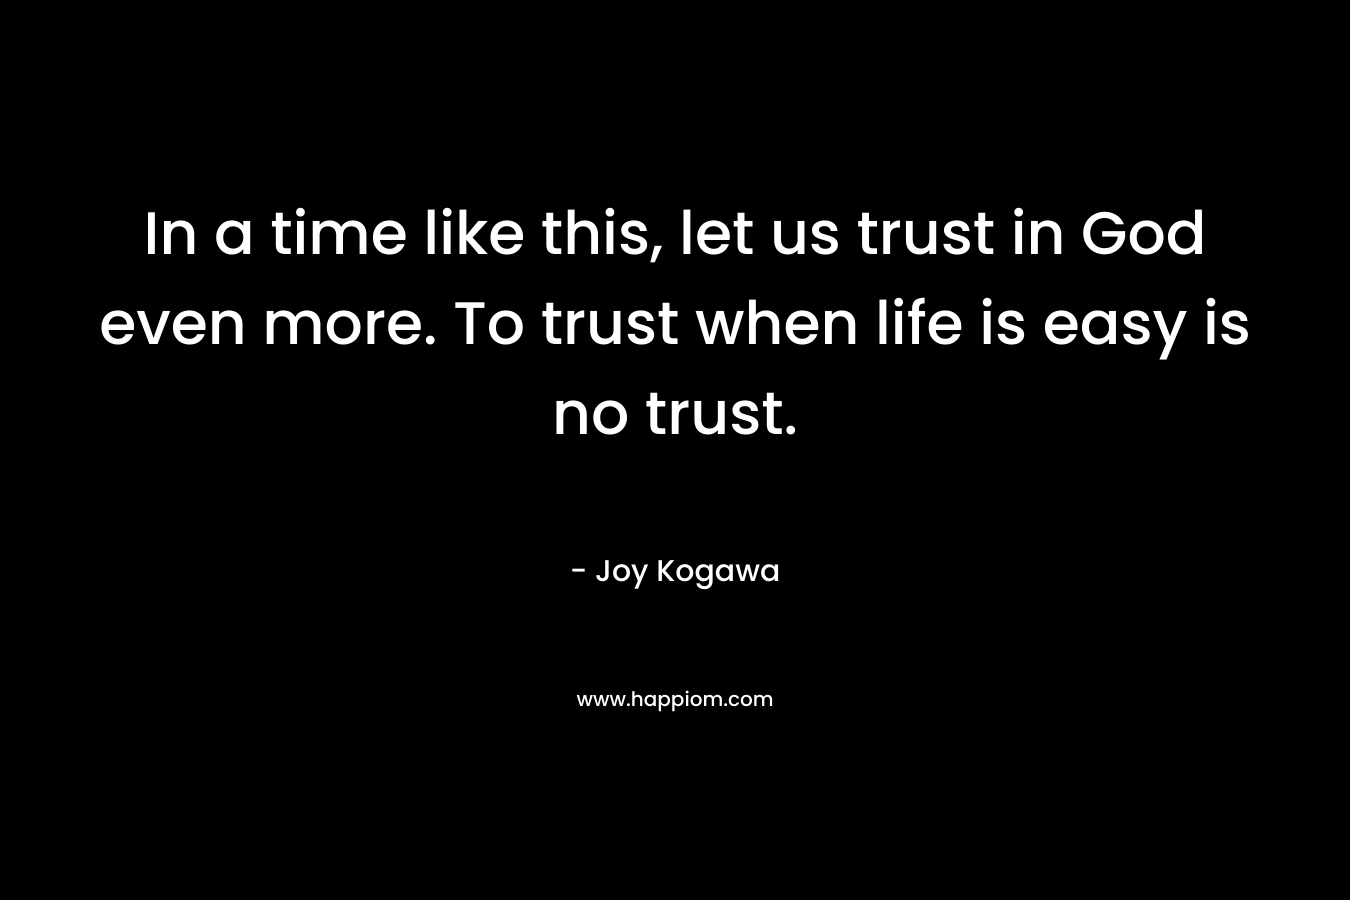 In a time like this, let us trust in God even more. To trust when life is easy is no trust.